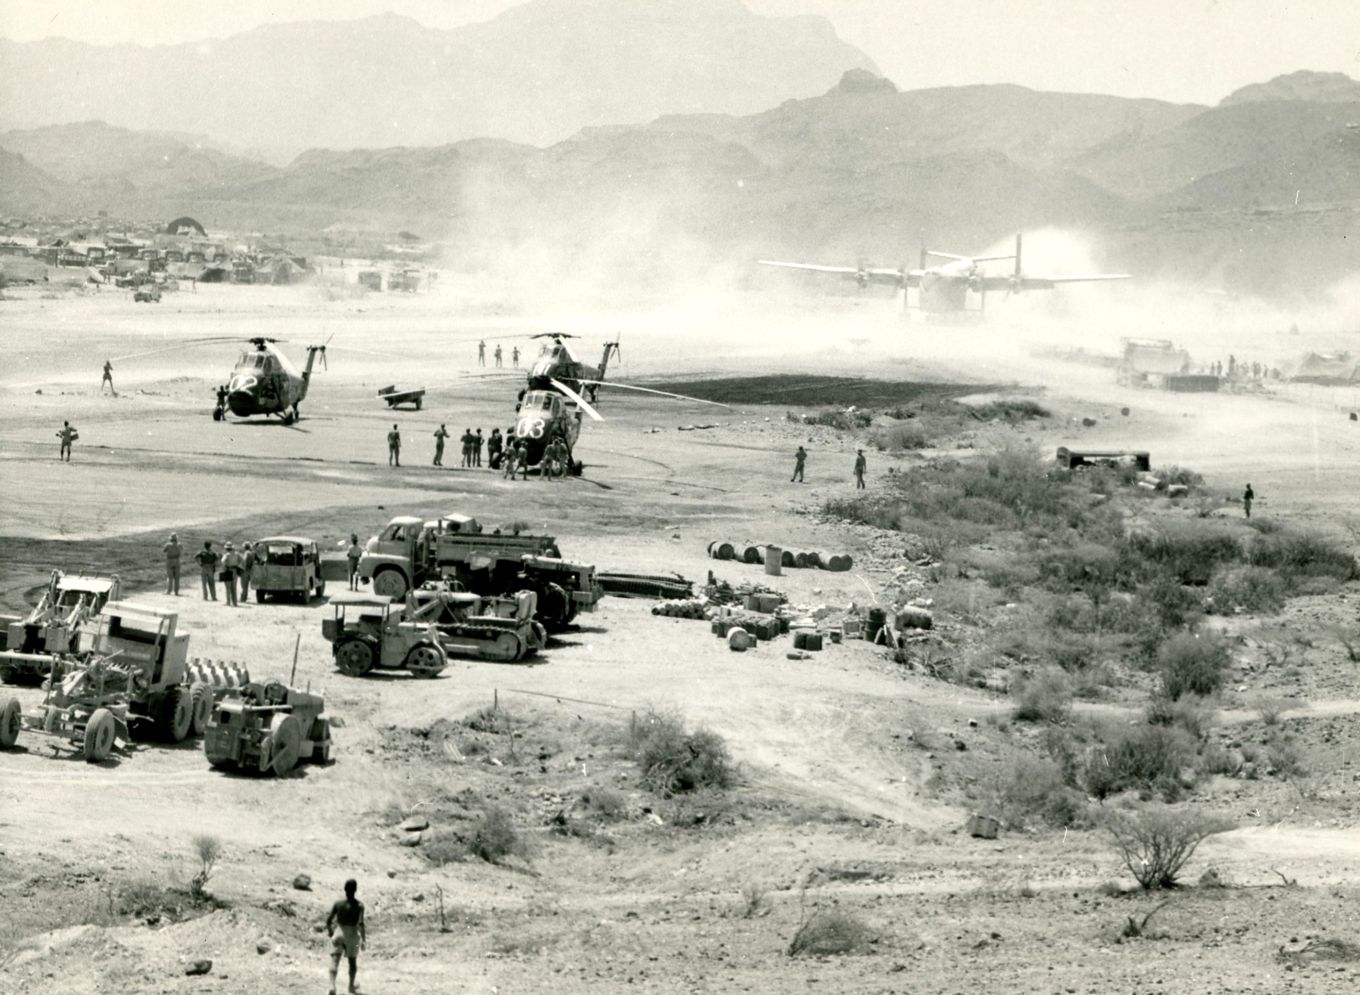 Historical image showing the Airfield Construction Branch in action in the Middle East during the 1960’s